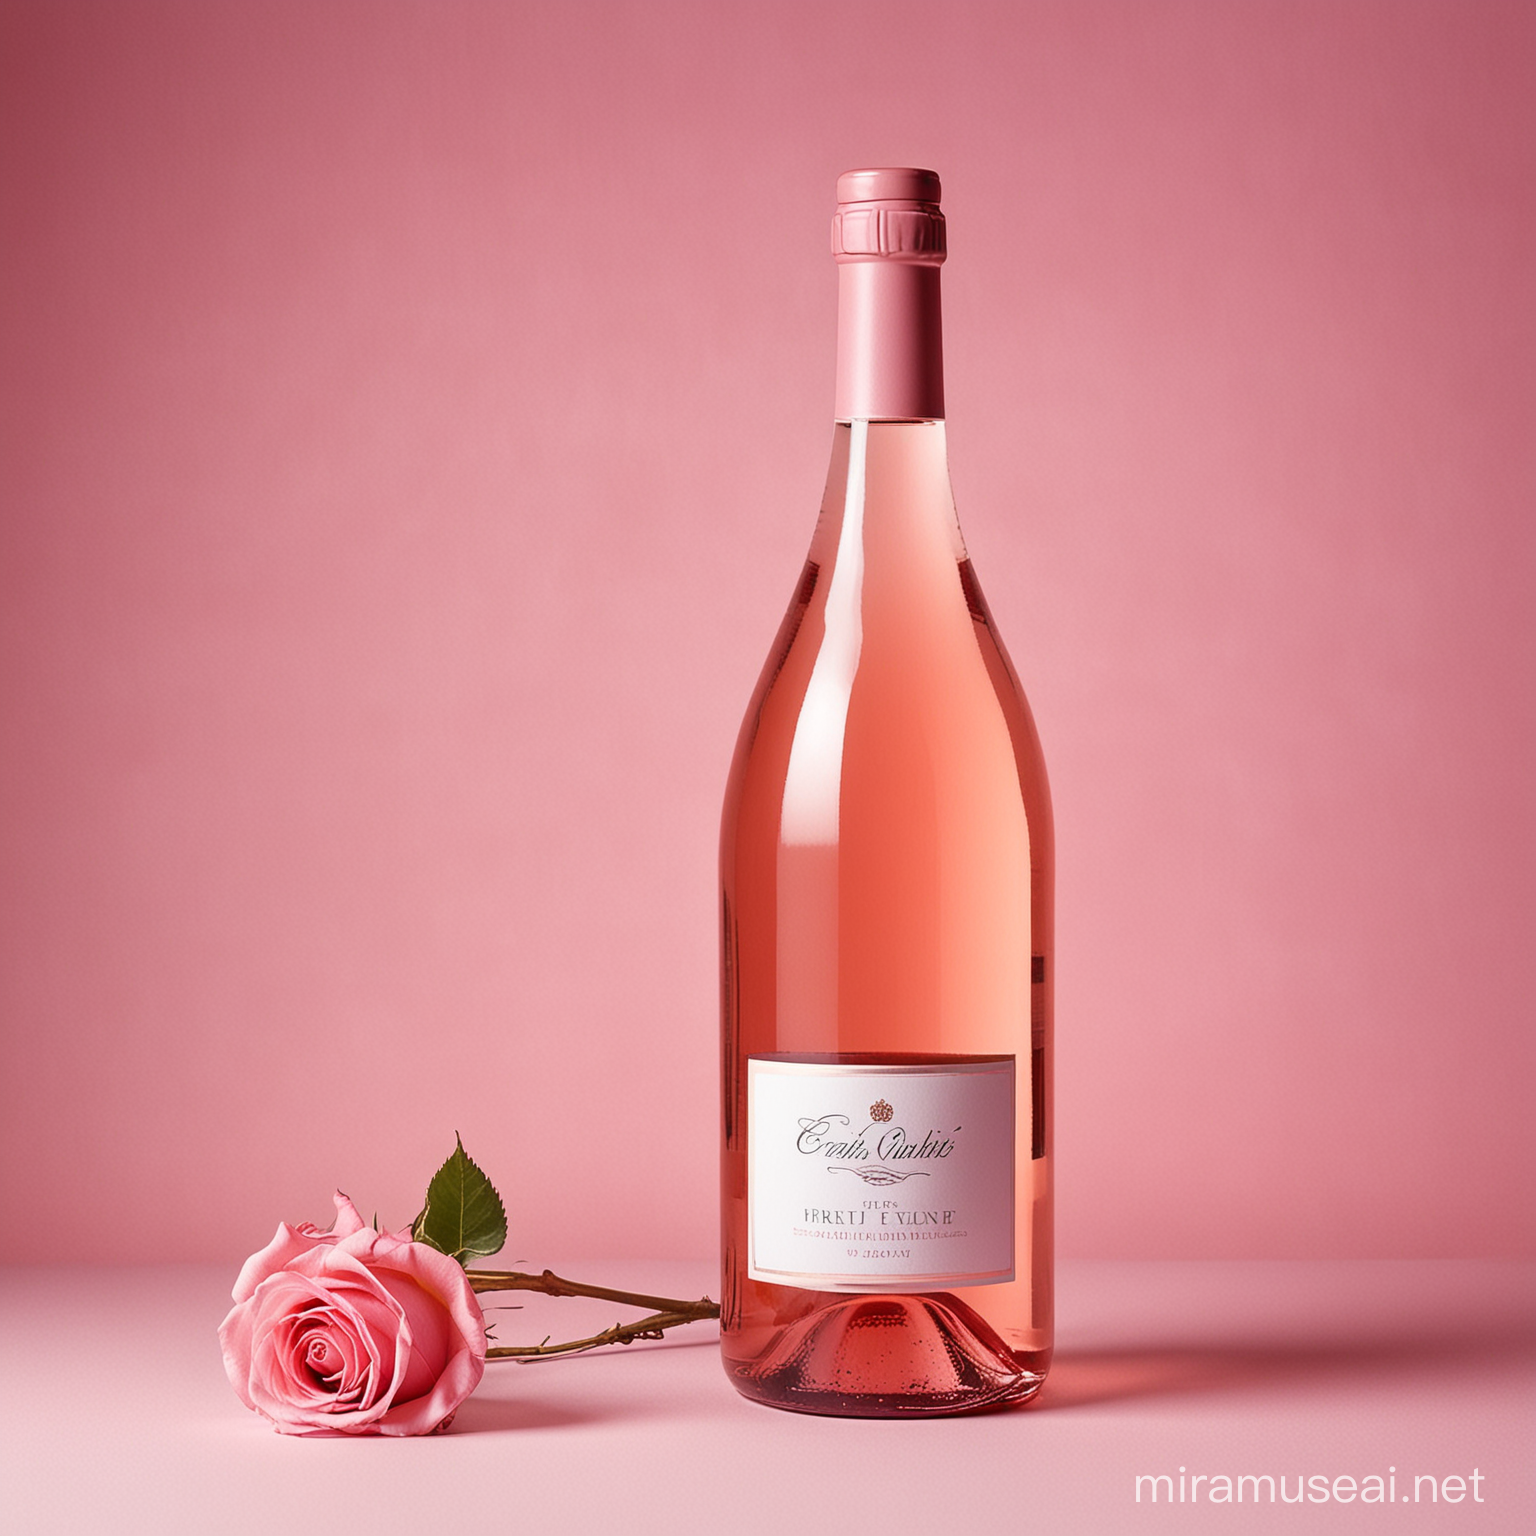 Rose Wine bottle on pink and fine background